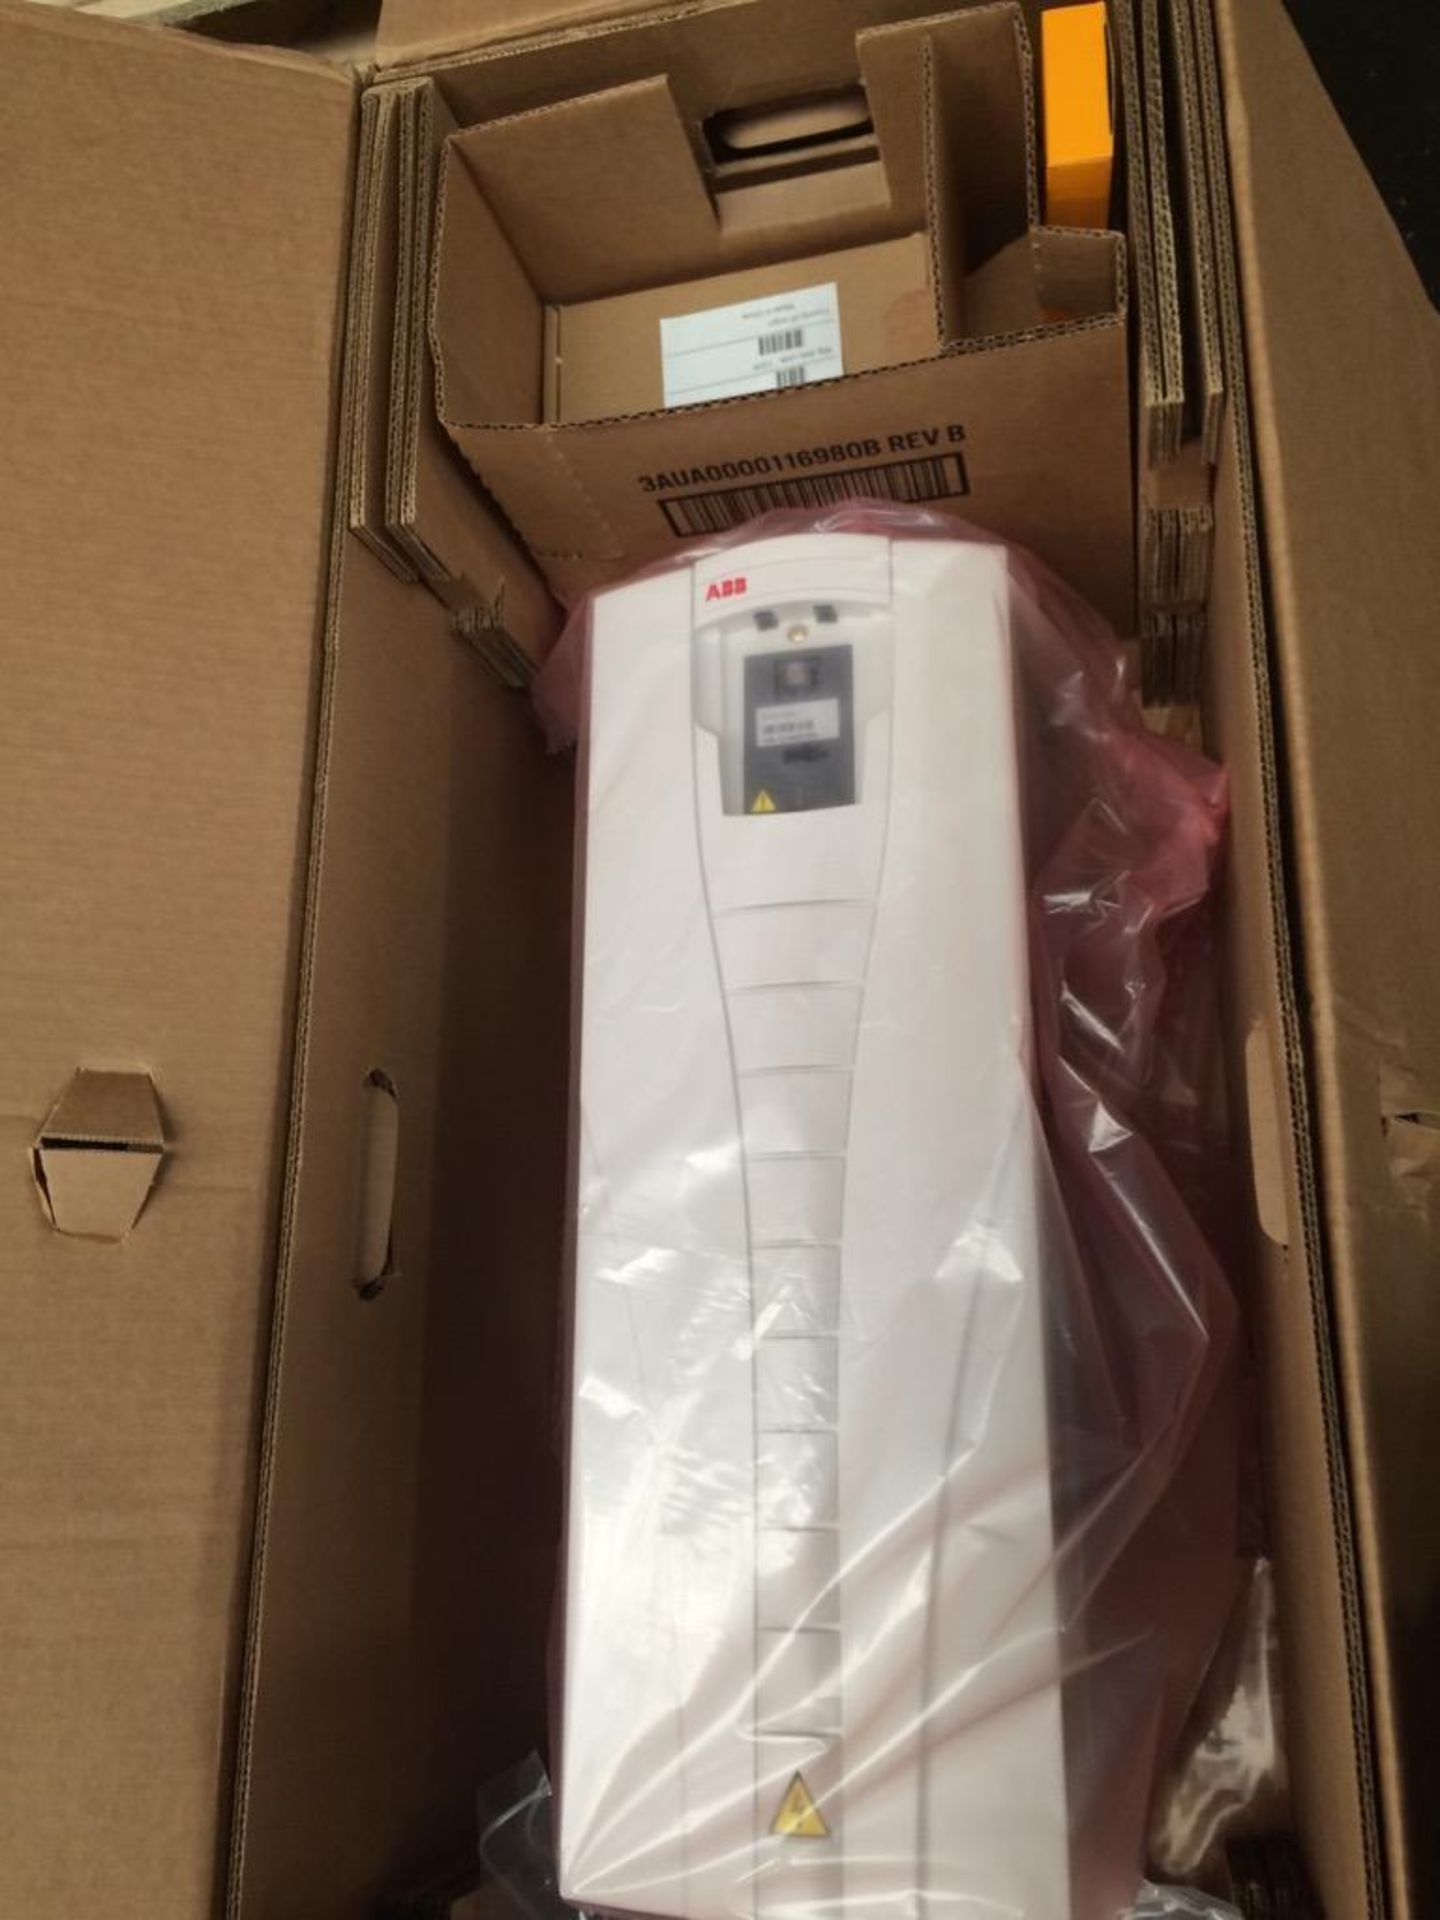 New In Box ABB Model ACS550-01-059A-4 40HP 30KW VFD Variable Frequency Drive. Serial Number 21340013 - Image 2 of 10